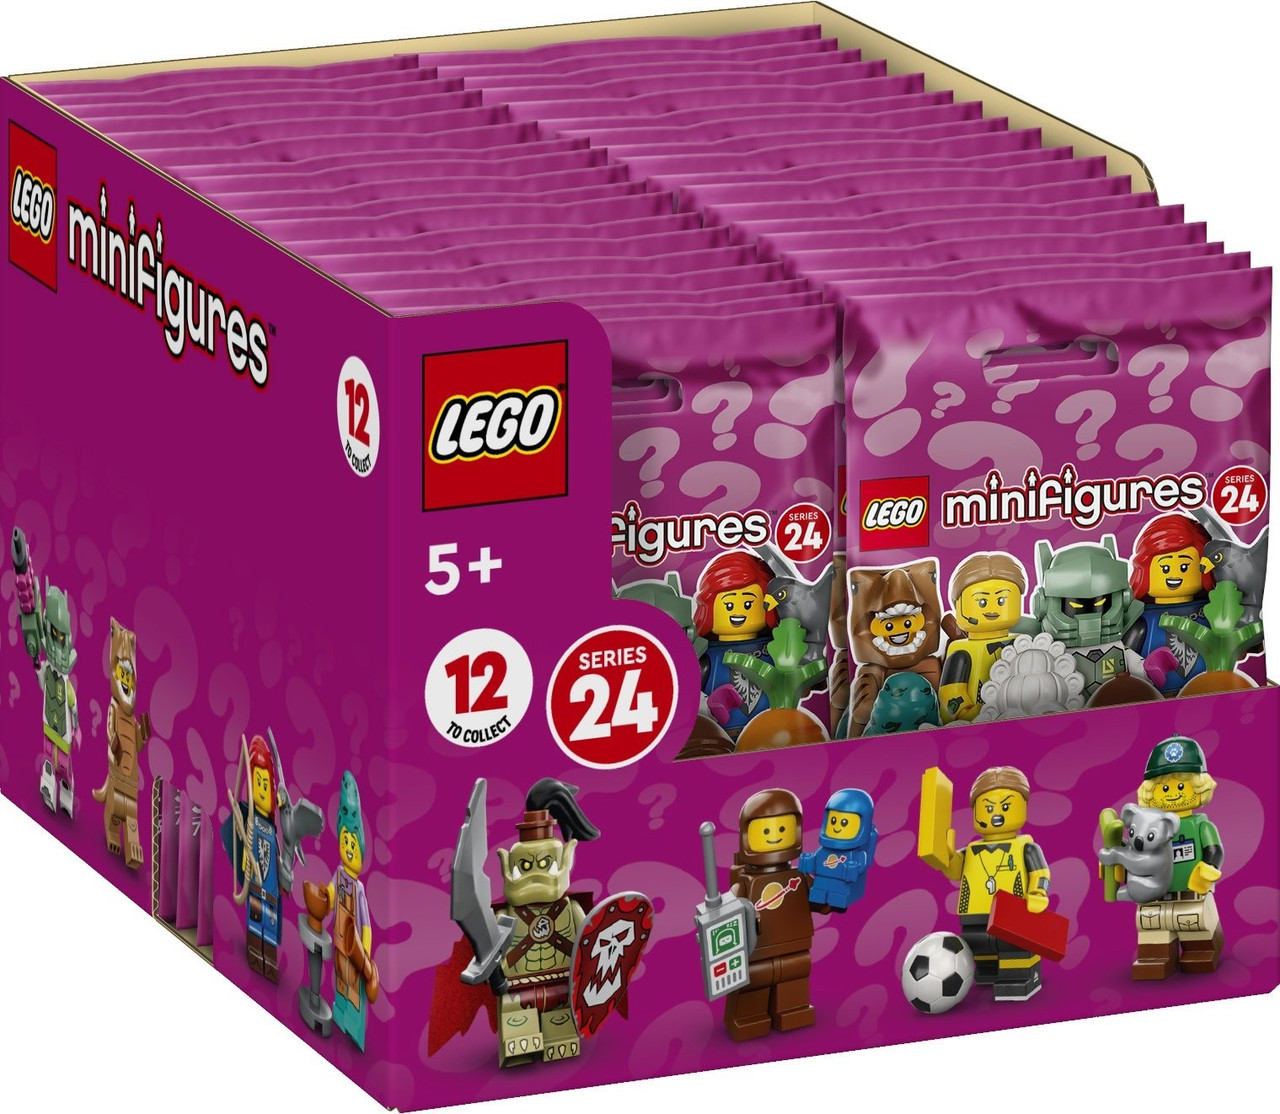 71032  LEGO® Minifigures Series 22 – LEGO Certified Stores